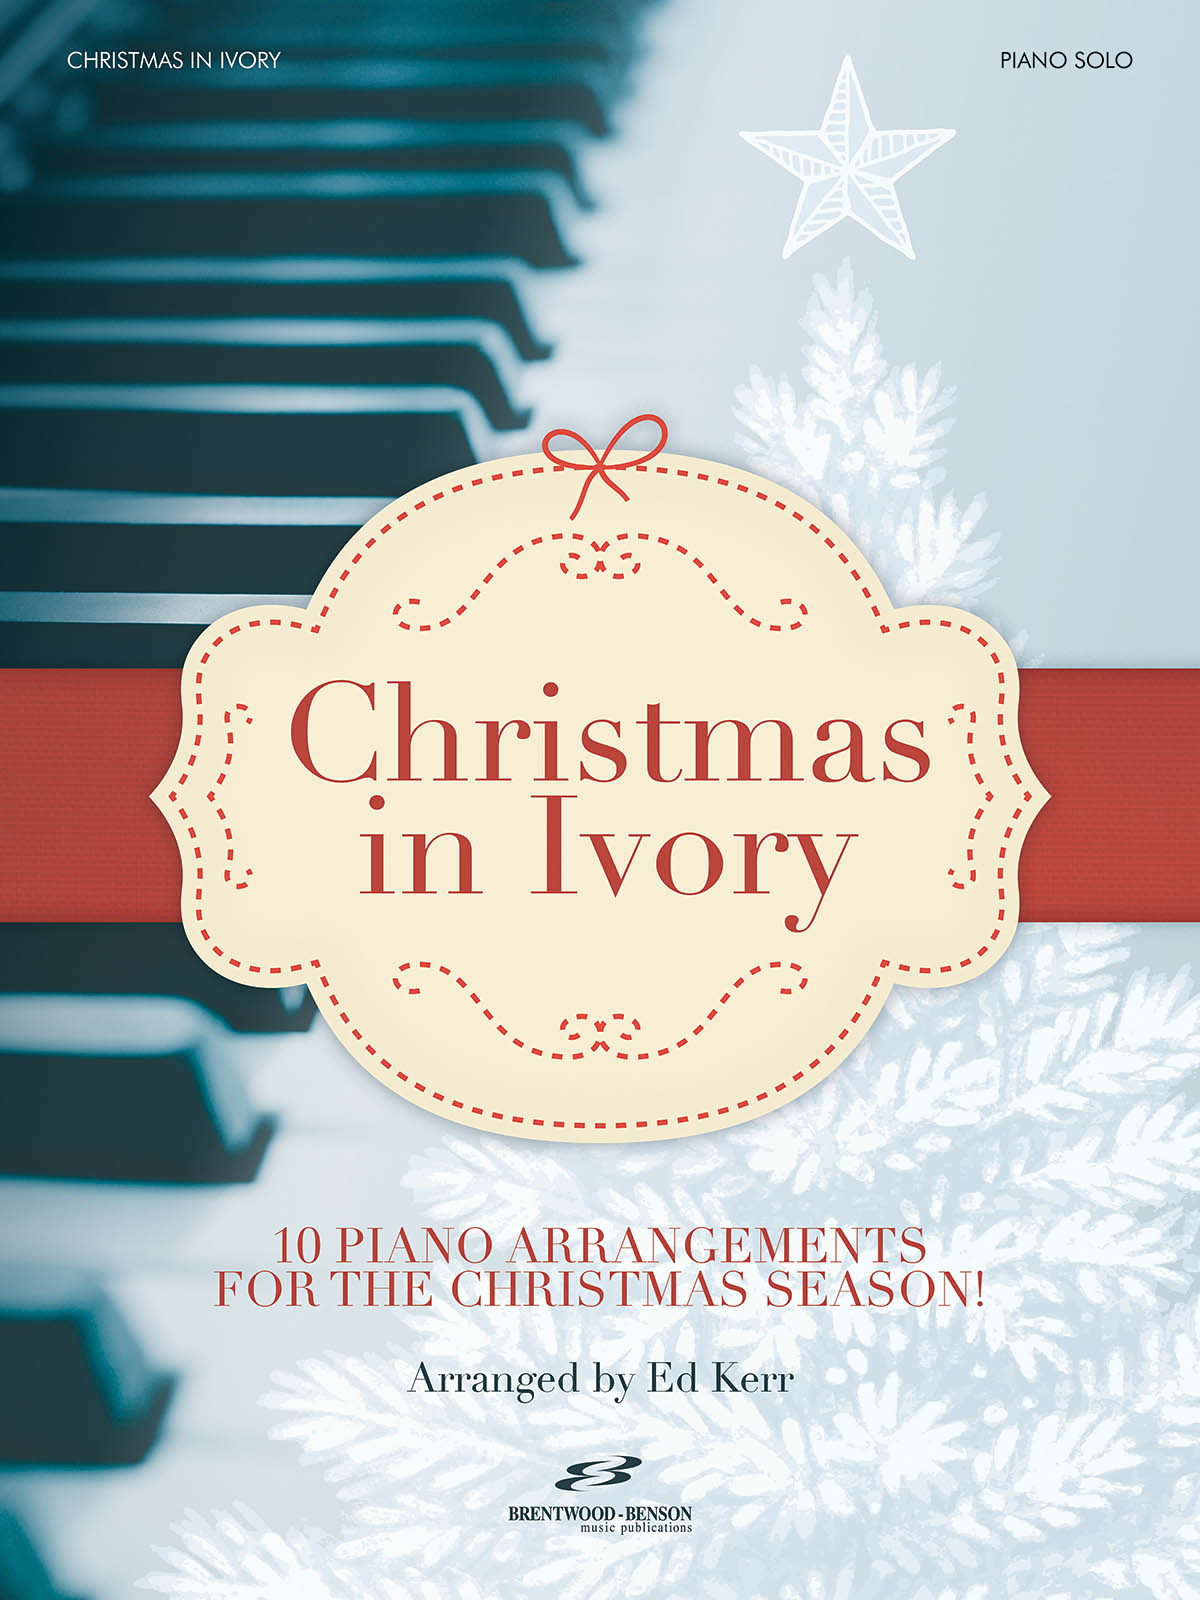 Christmas in Ivory